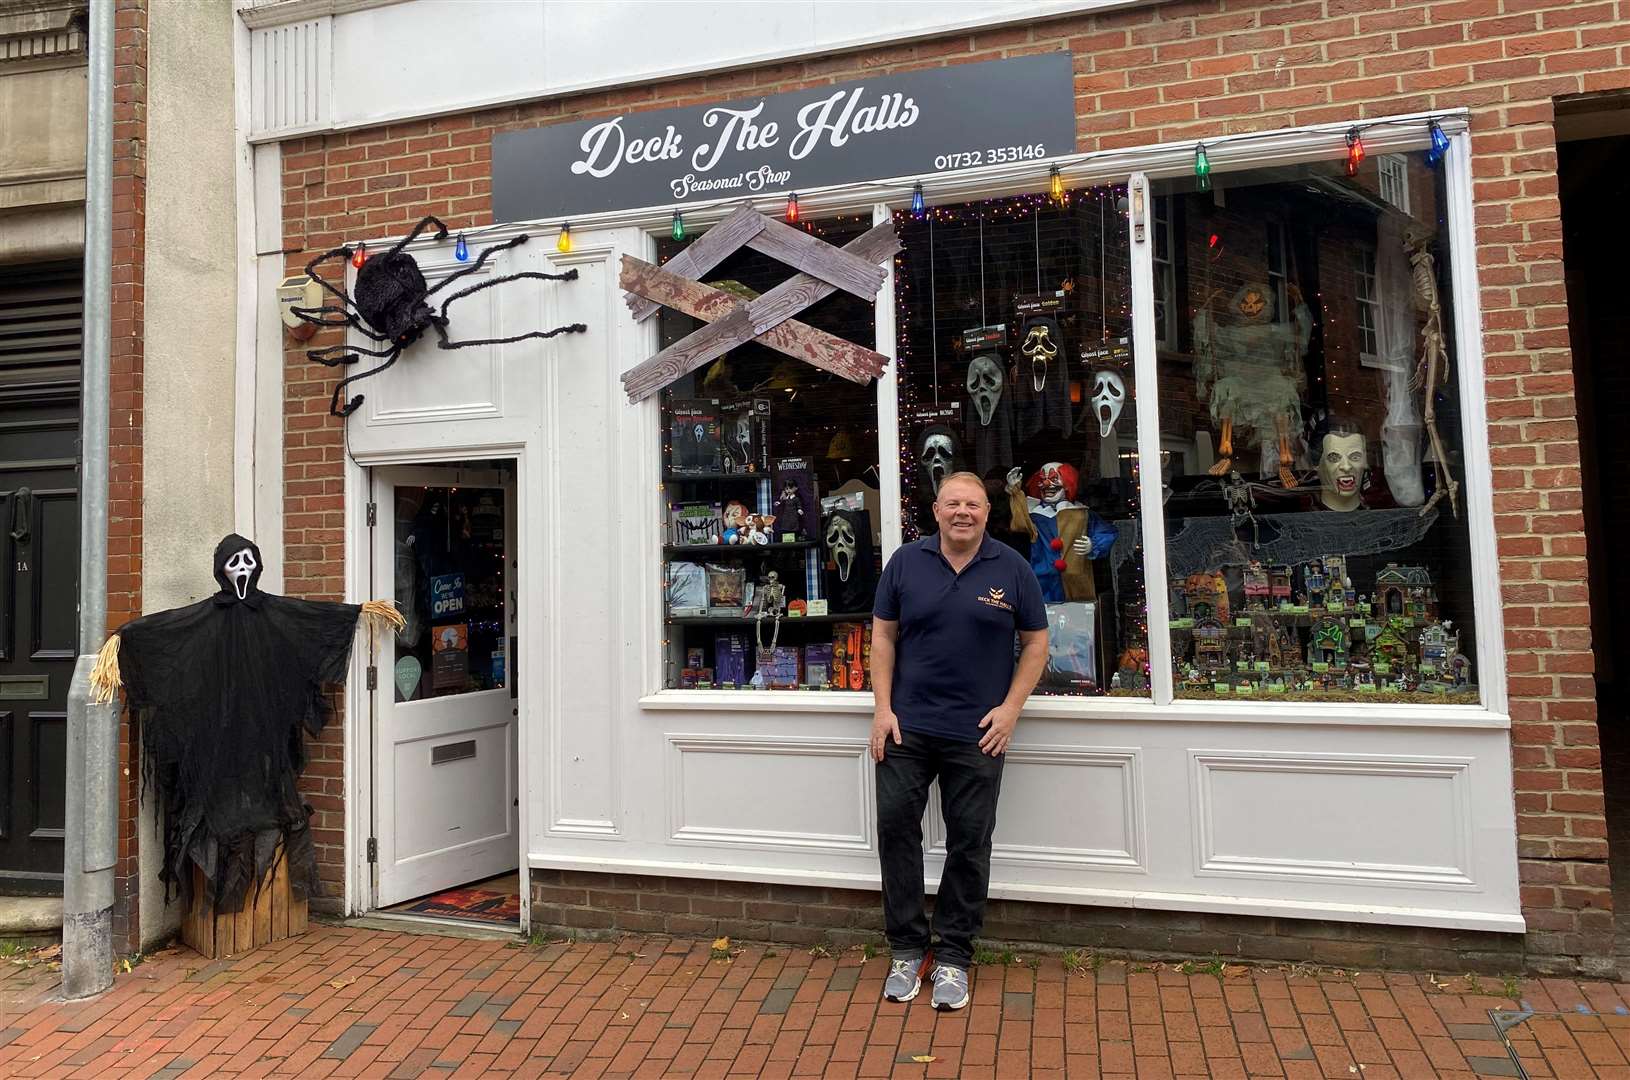 Paul Martin runs The Halloween Store, also known as Deck The Halls, in Castle Street, Tonbridge